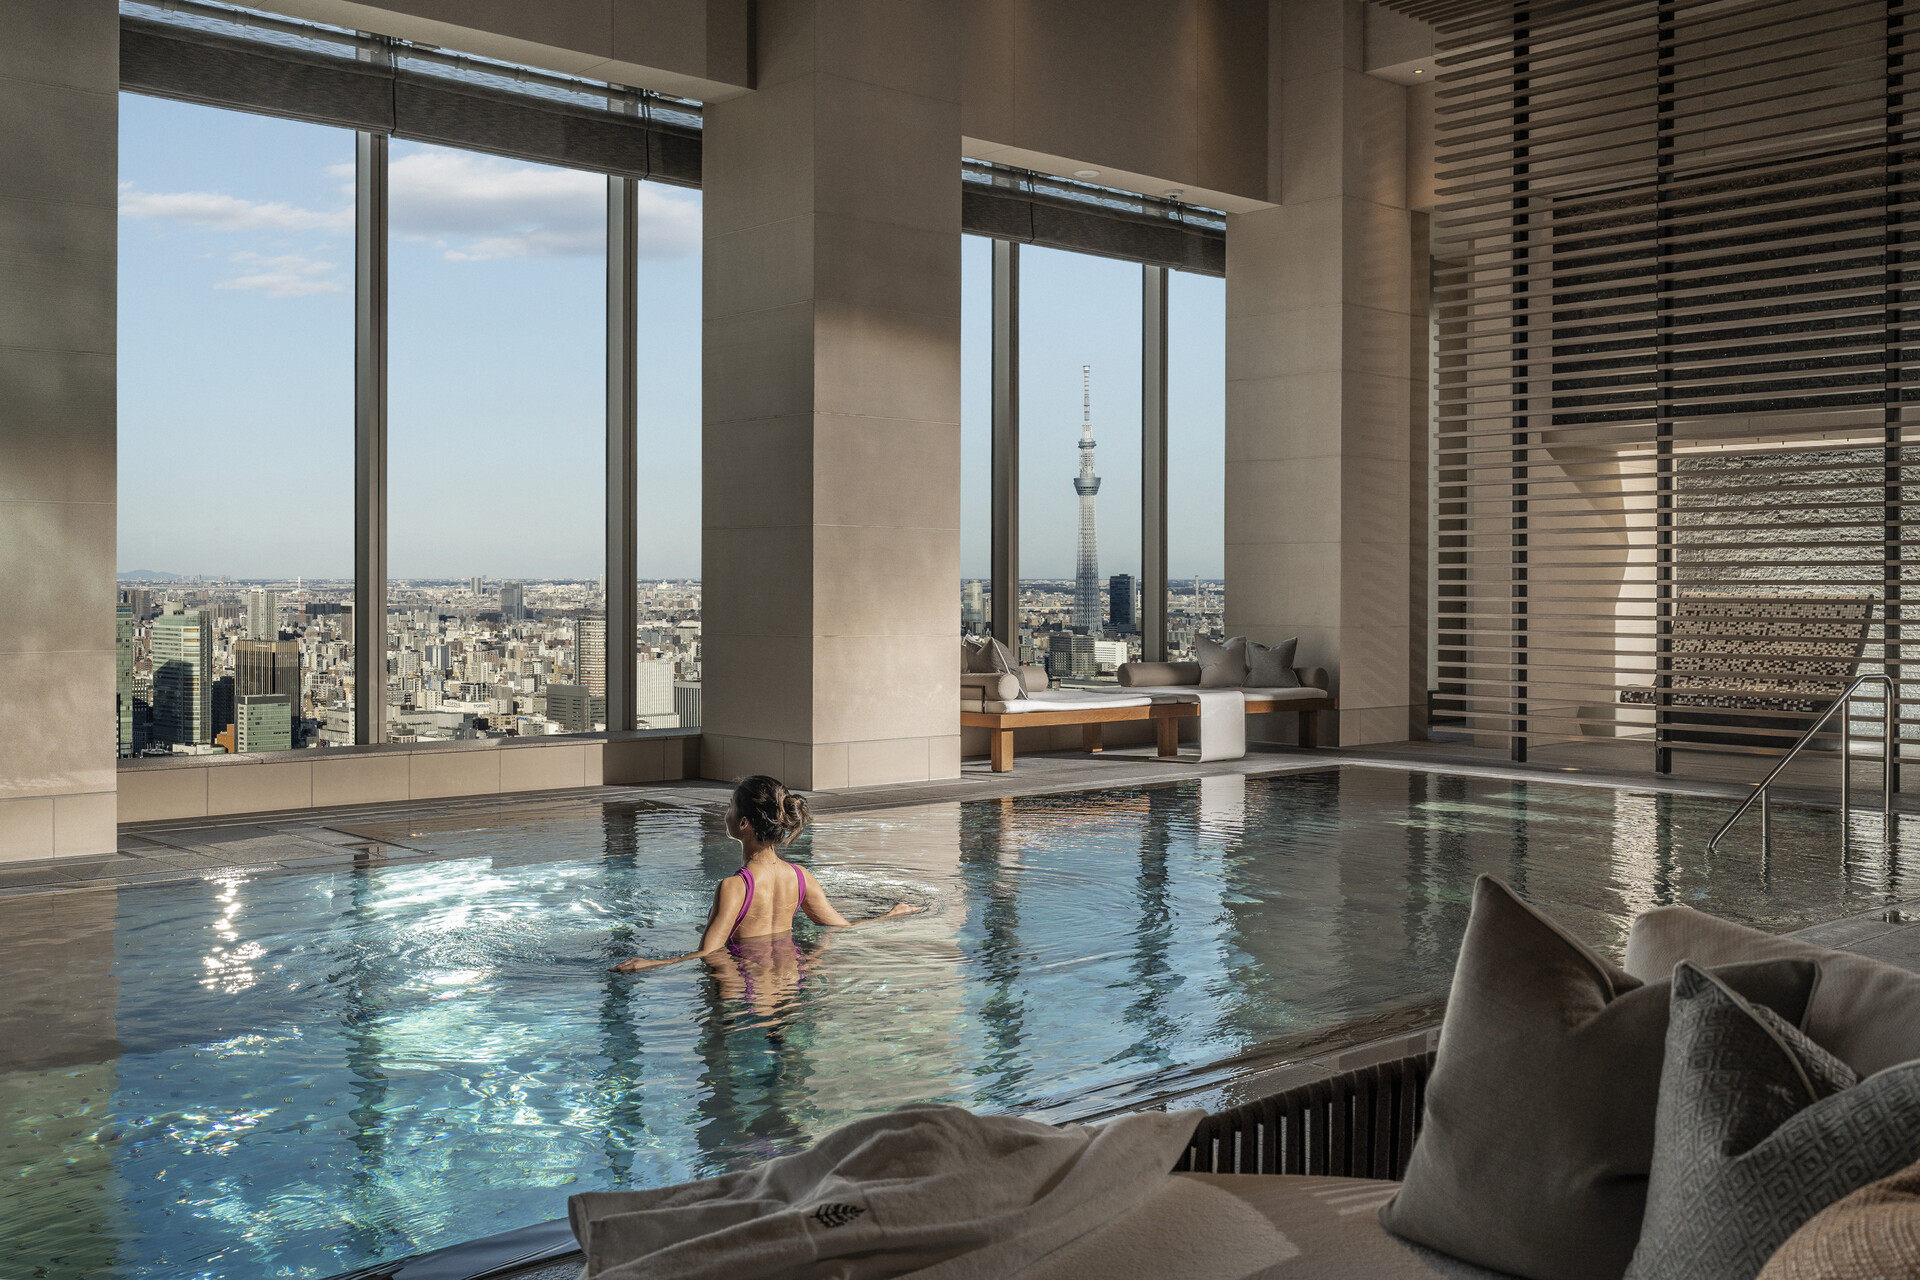 Tokyo is full of hidden luxury hotels like the Four Seasons at Otemachi. Photo: Four Seasons Hotel Tokyo at Otemachi